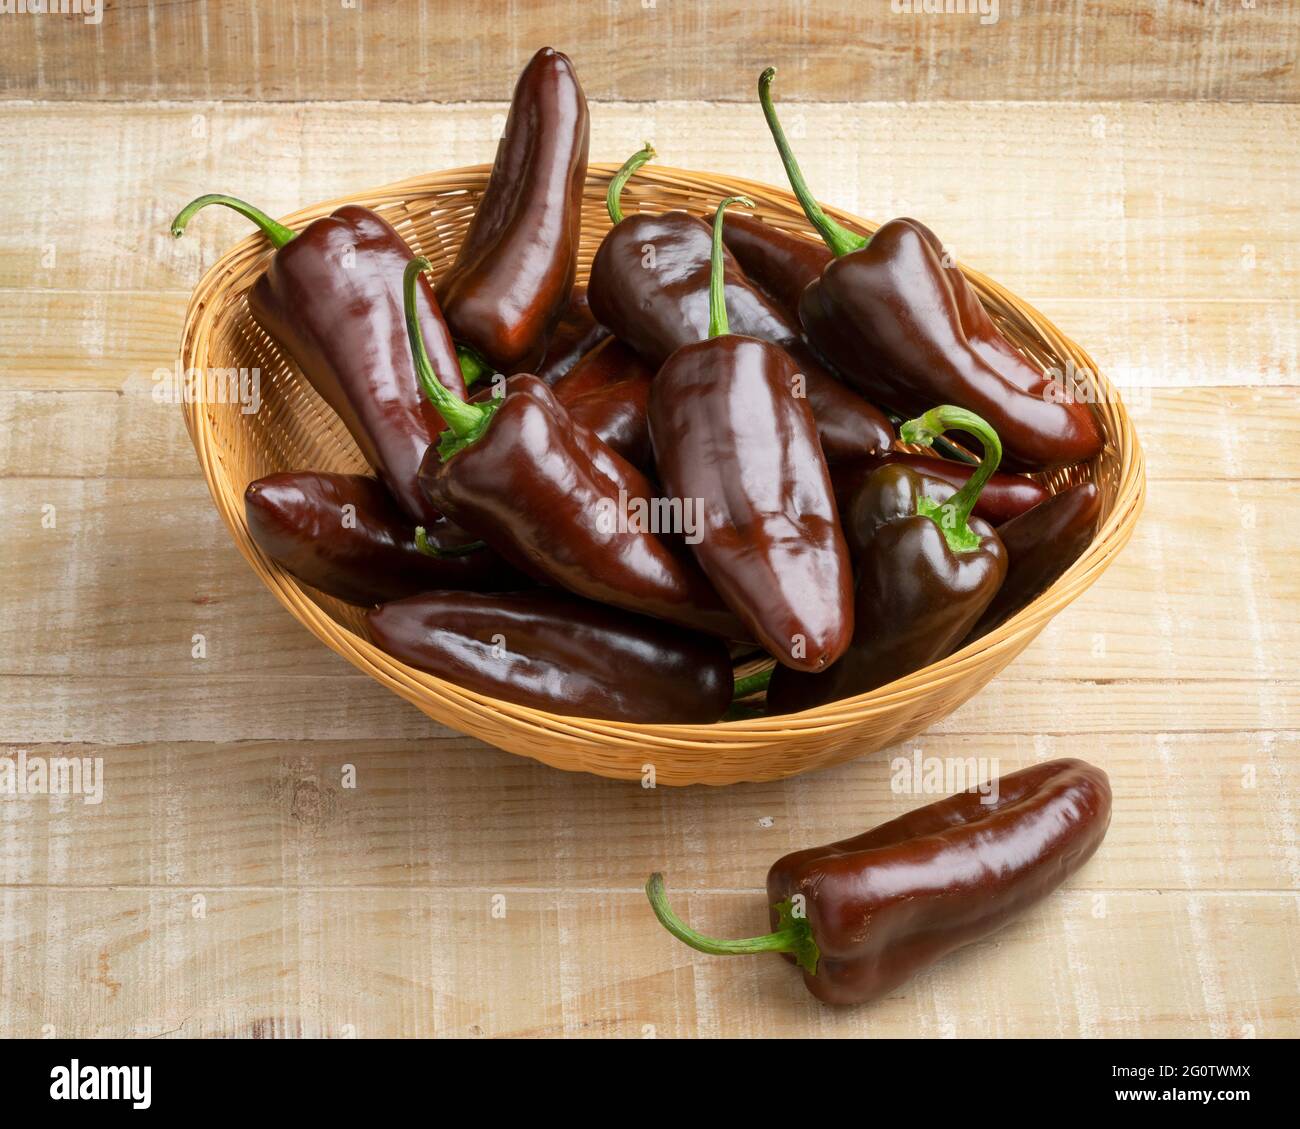 Basket with whole fresh chocolate mini pointed bell peppers close up on wooden background Stock Photo